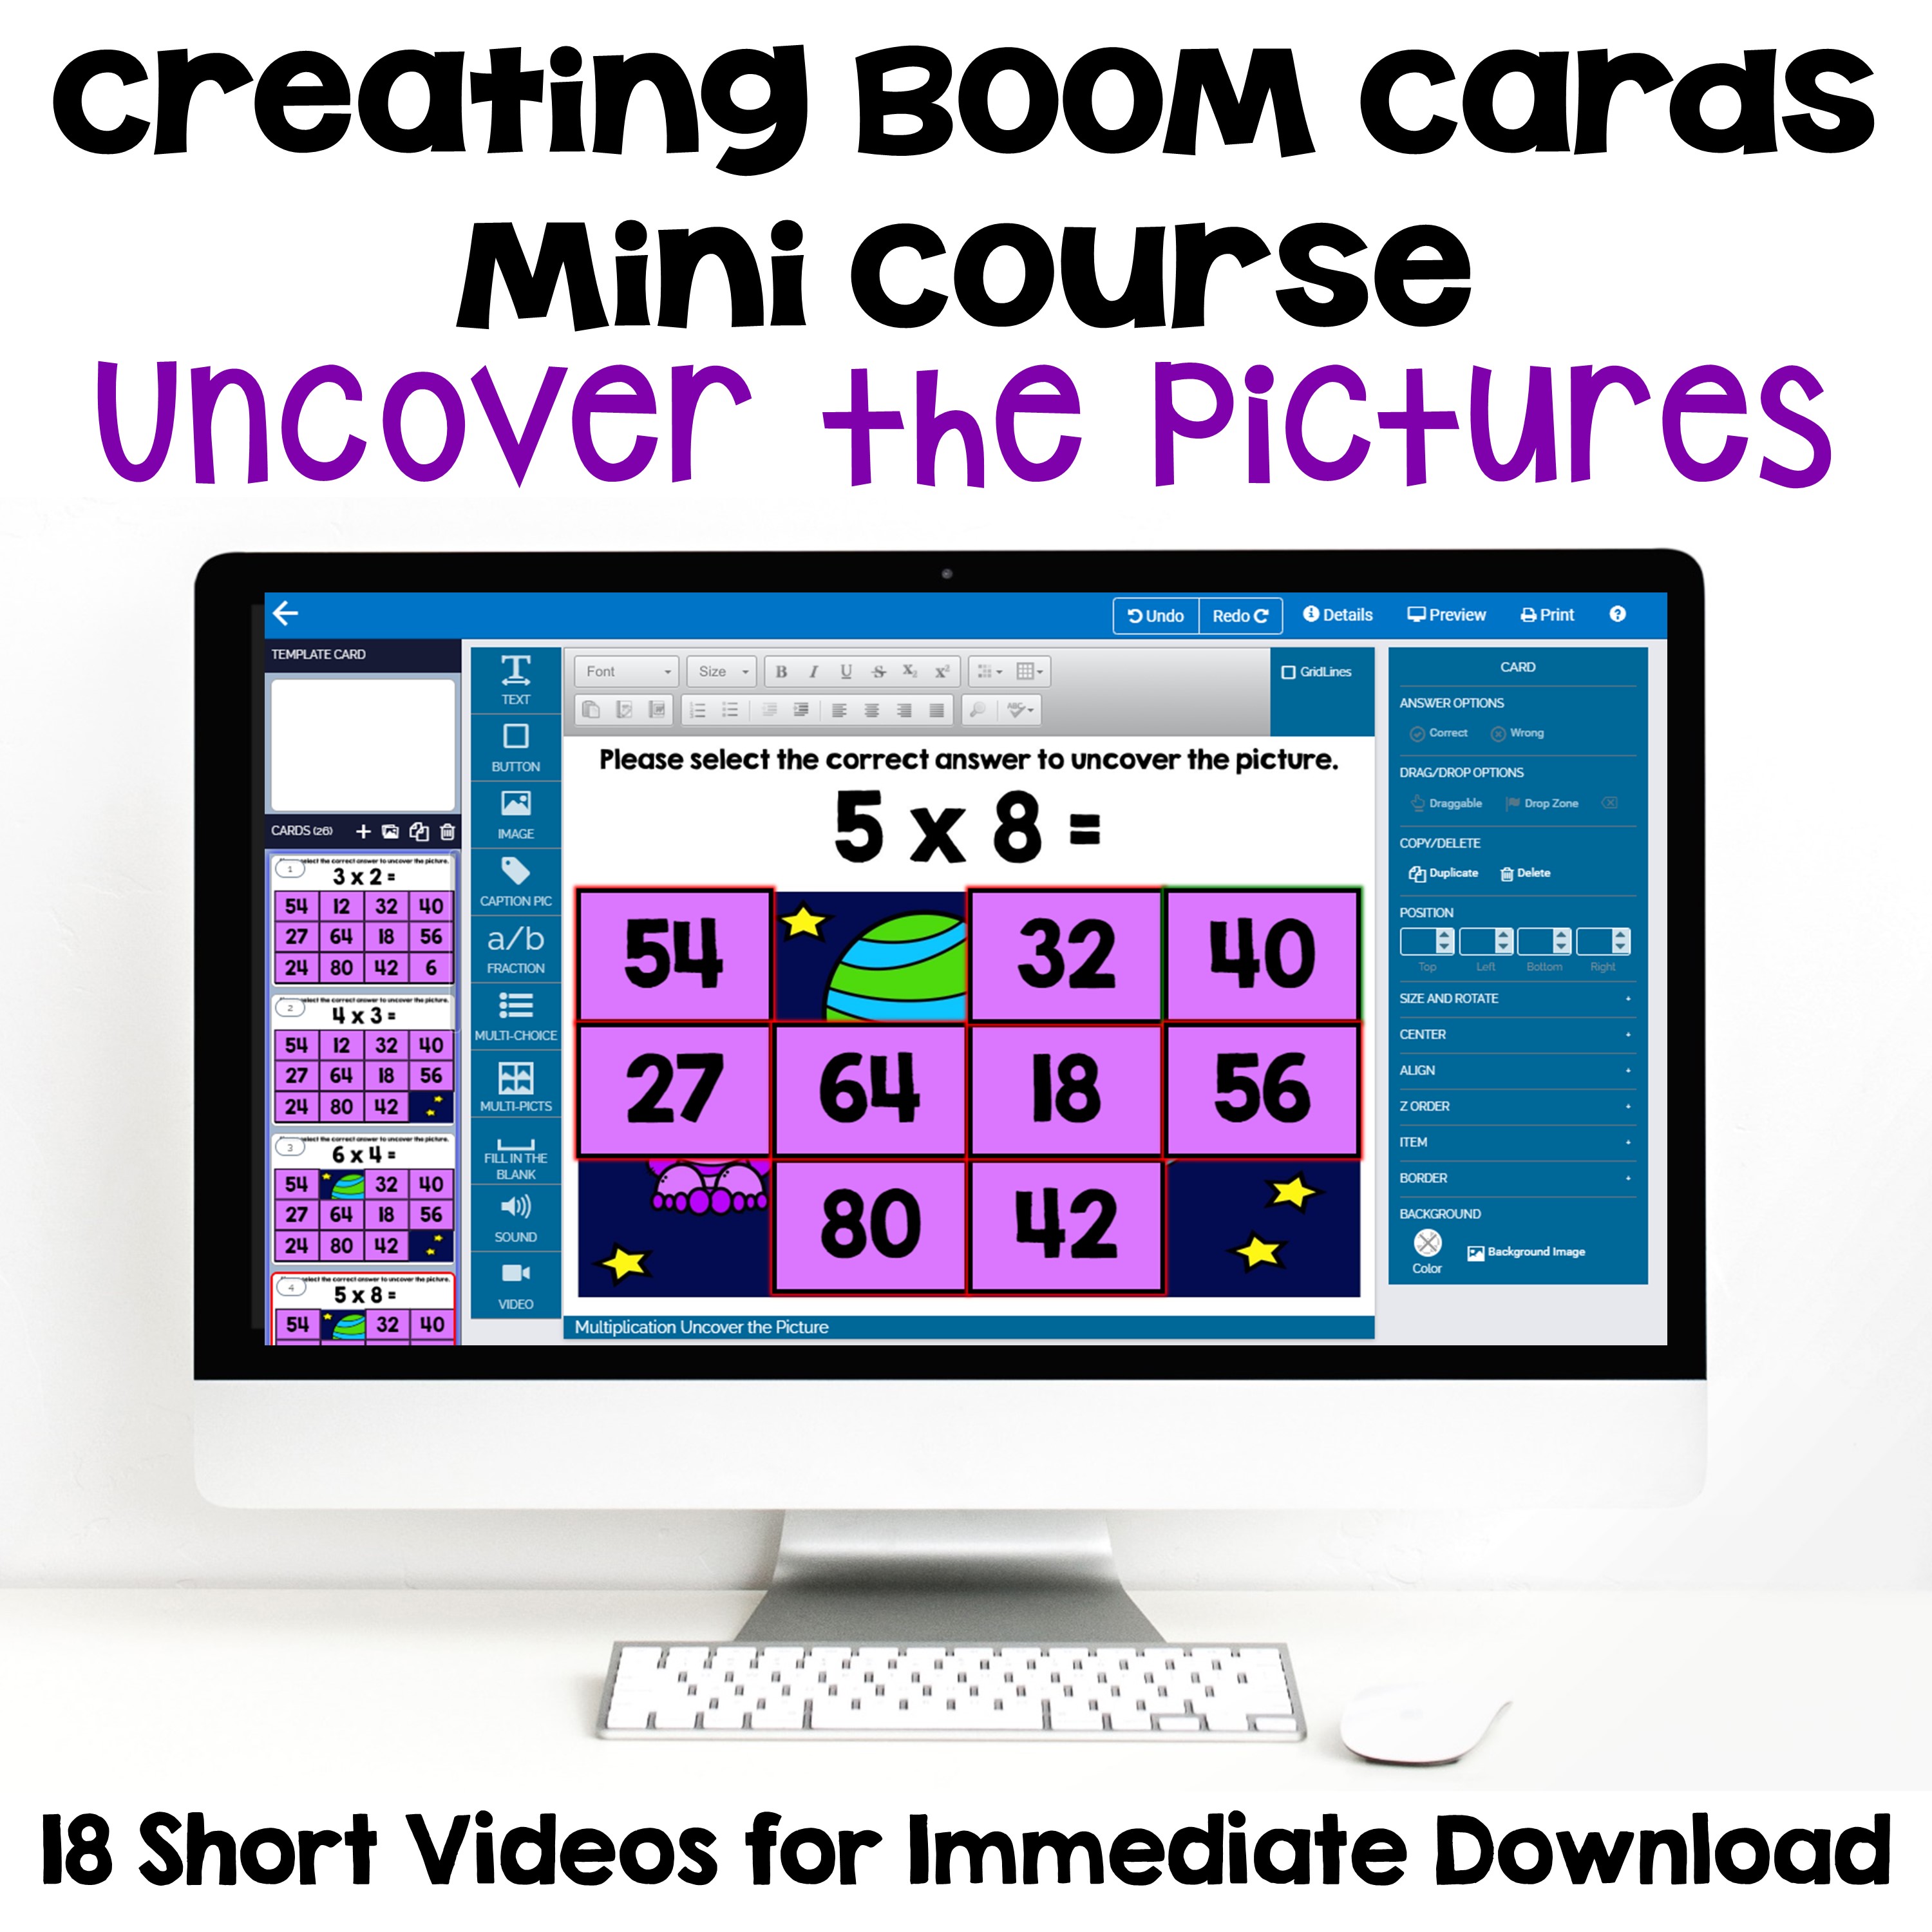 Creating Boom Cards Mini Course for Uncover the Pictures